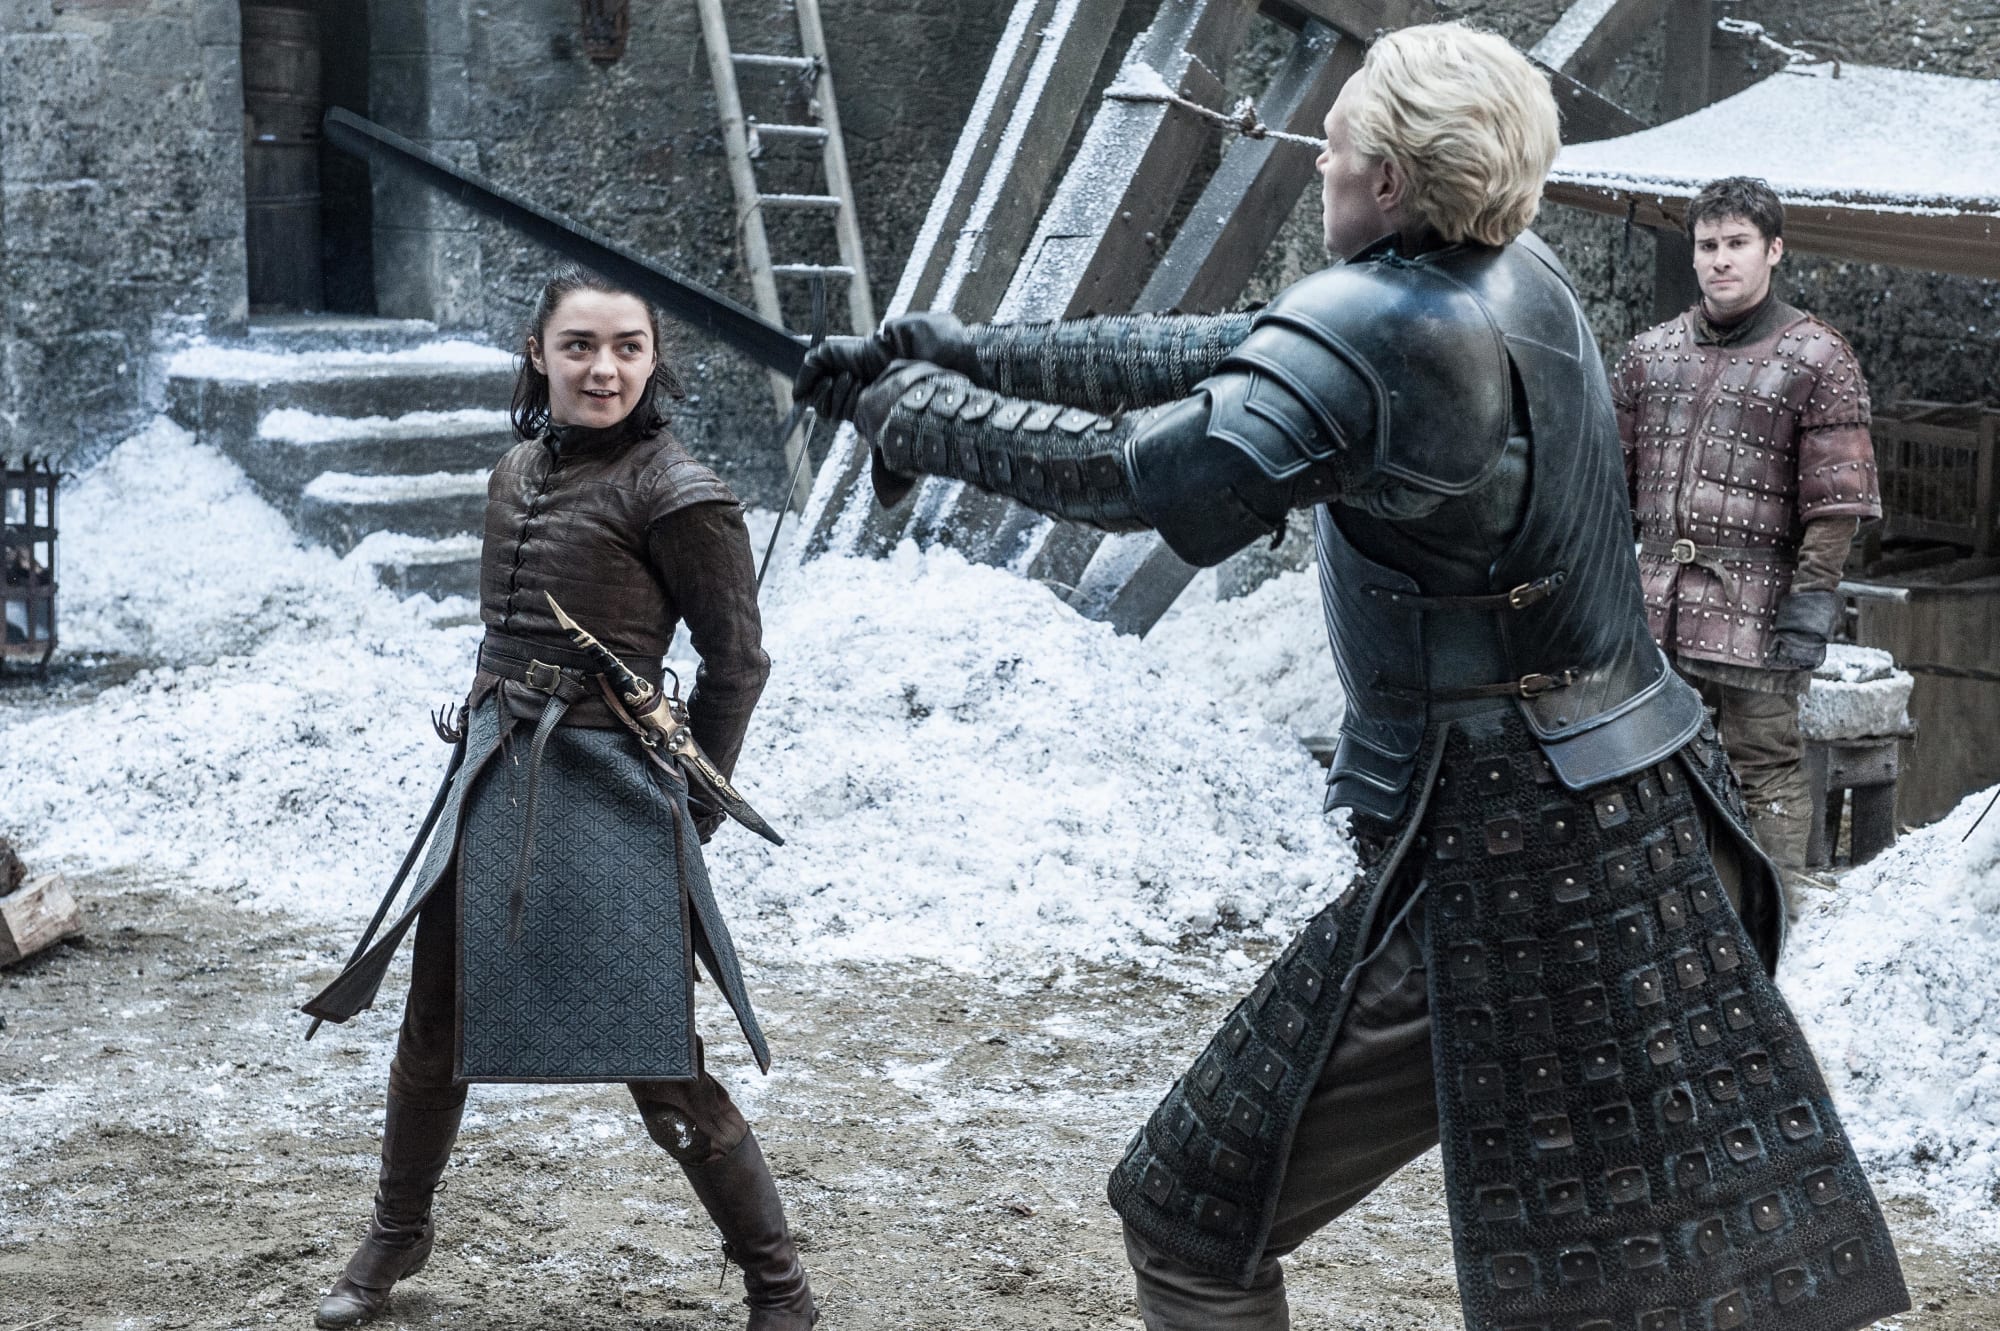 25 Best Game of Thrones Characters, Ranked - Best Game of Thrones